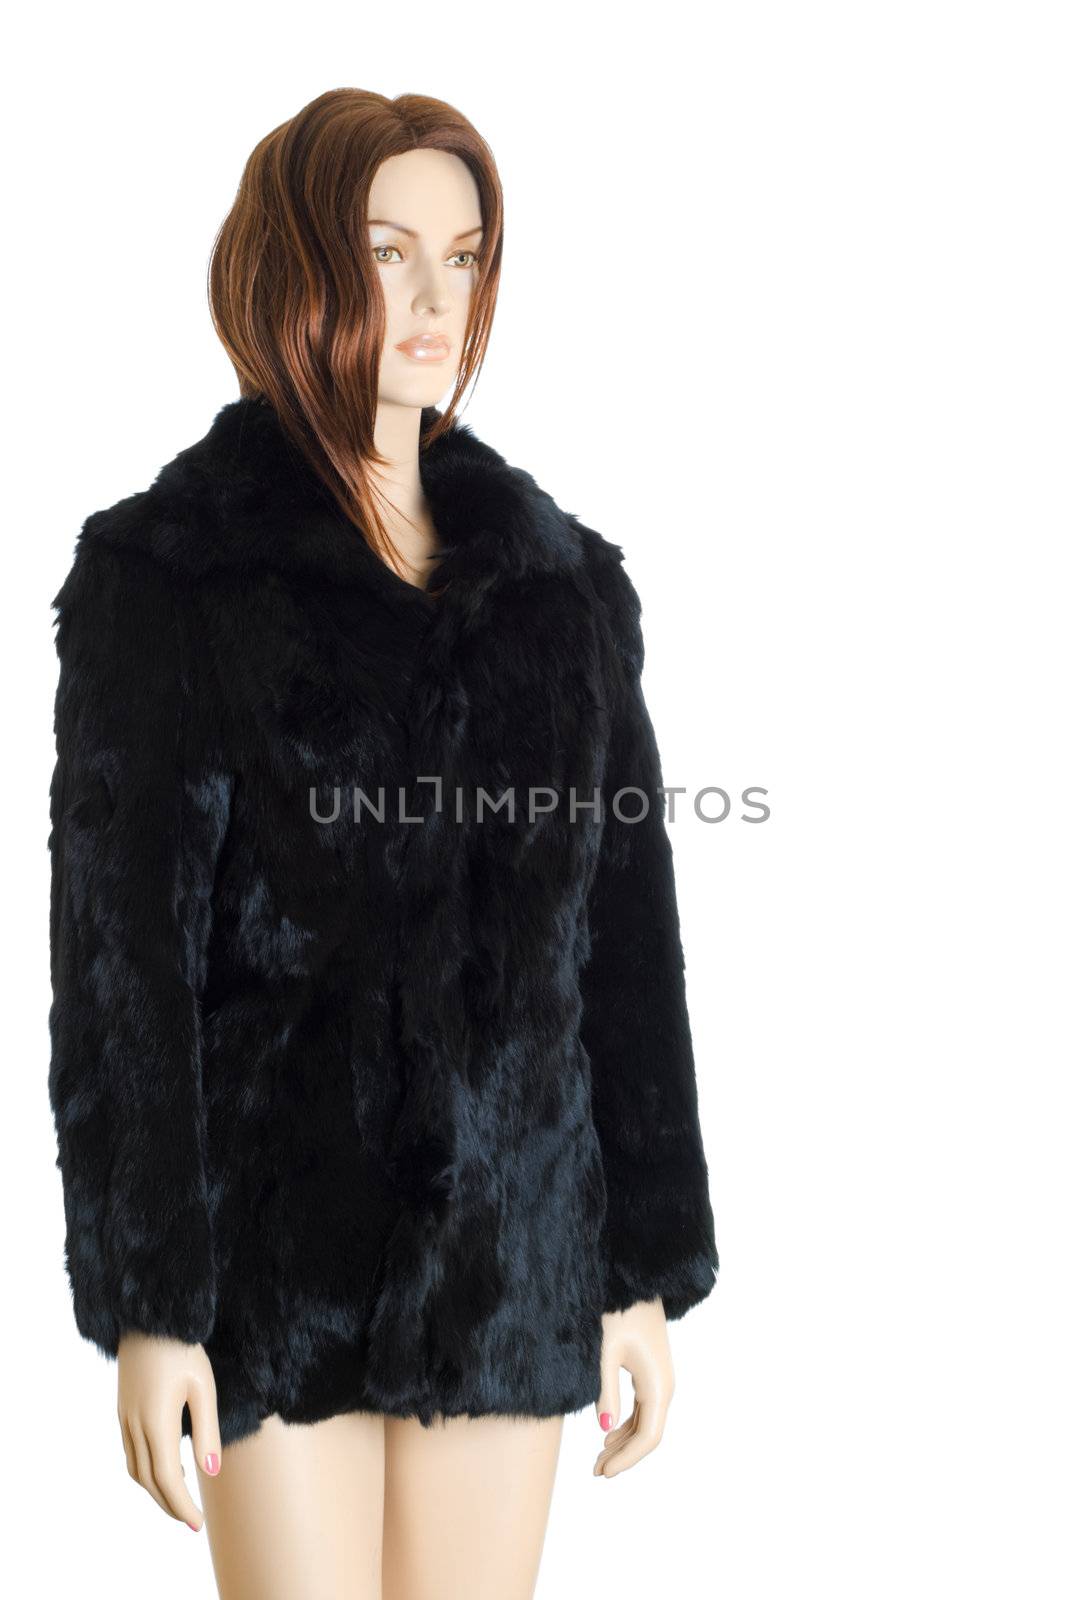 Mannequin in fur coat | Isolated by zakaz